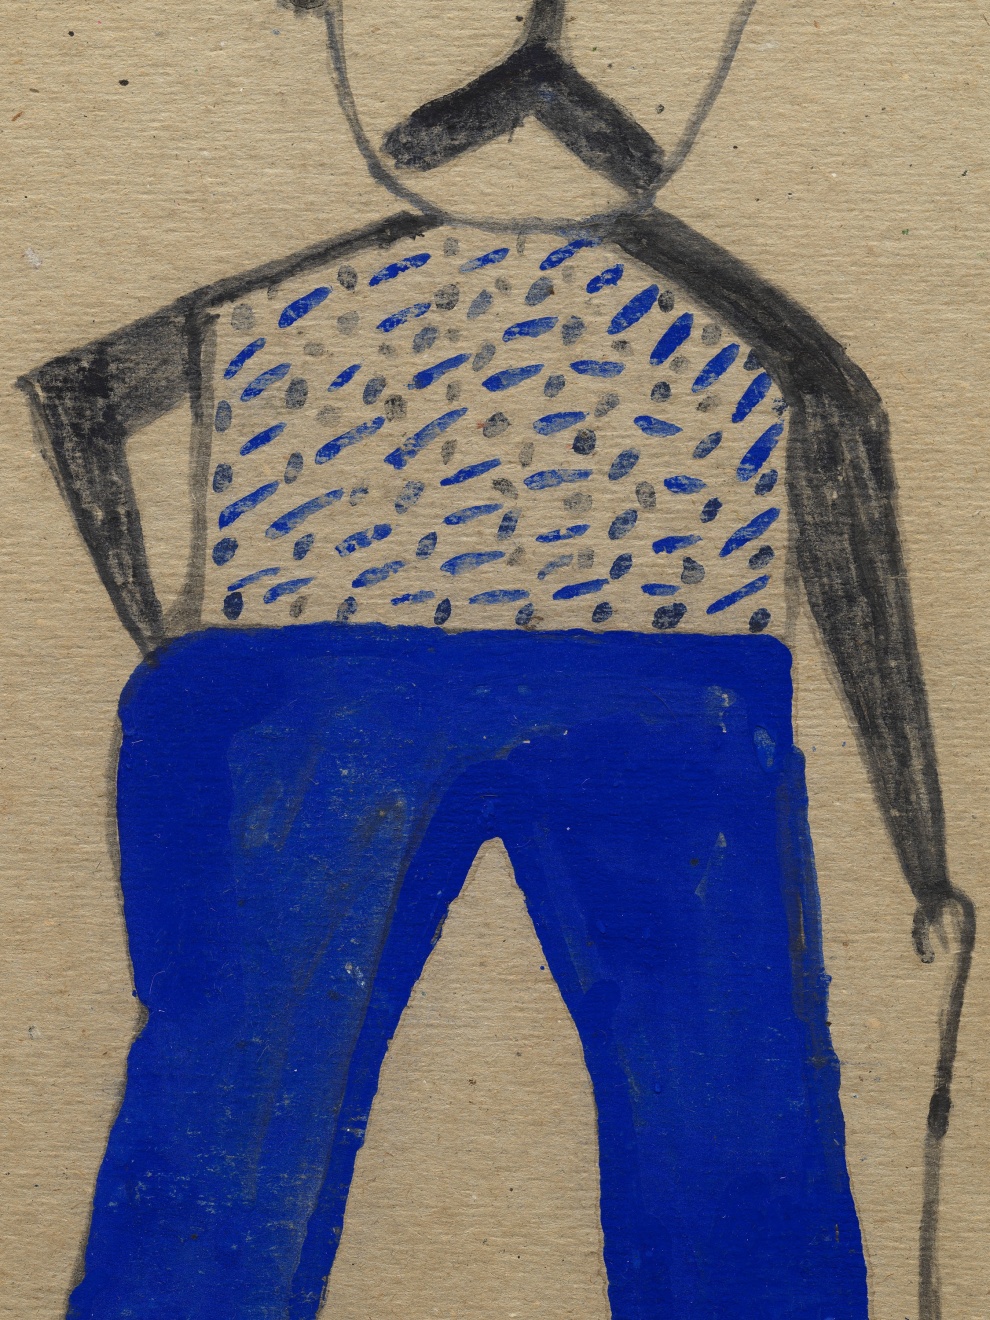 Bill Traylor, Untitled (Man with Blue Pants and Cane), c. 1939 - 1941